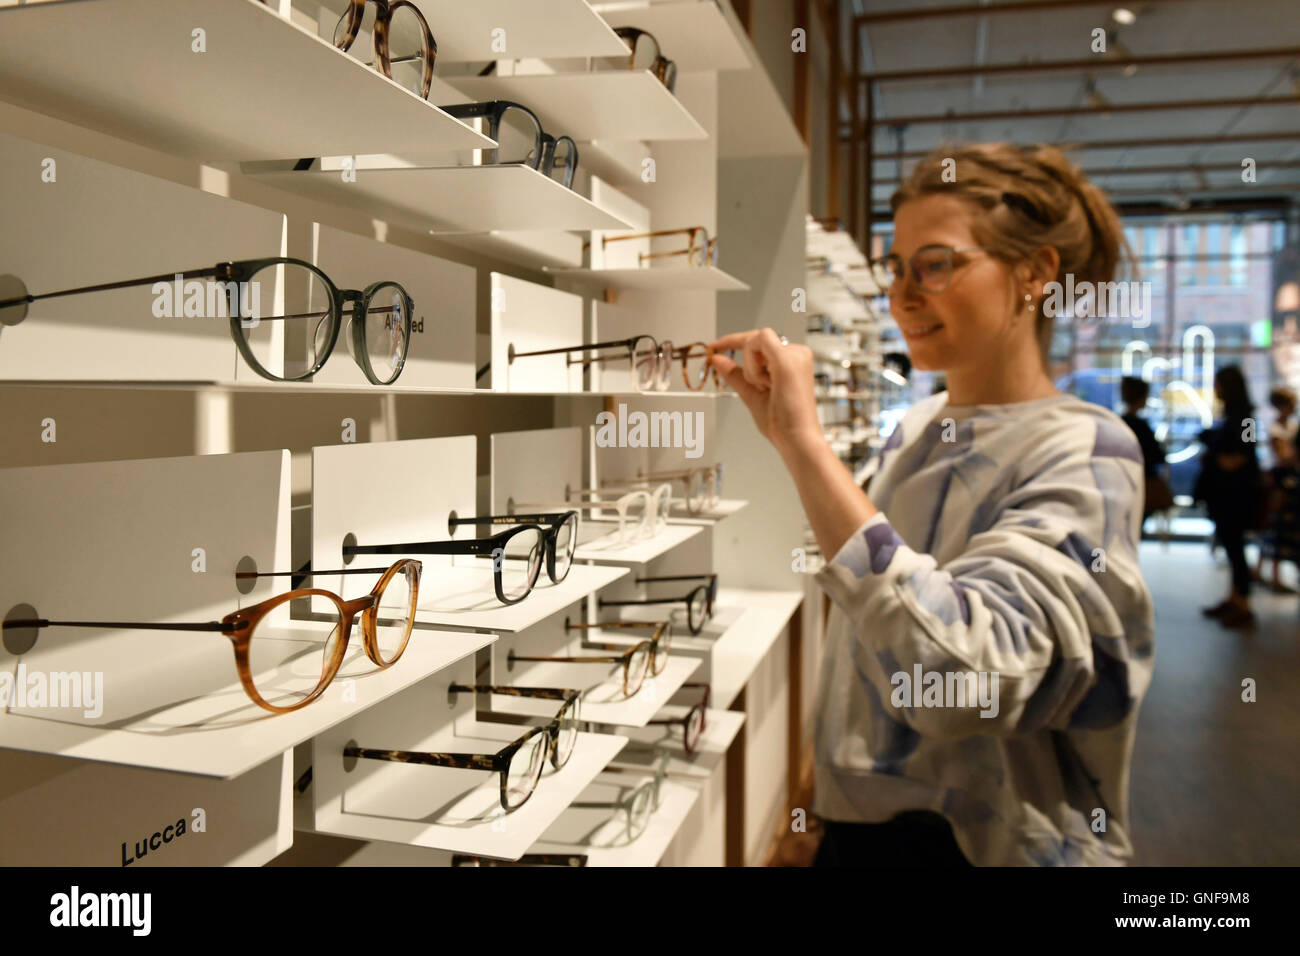 Berlin, Germany. 23rd Aug, 2016. Cora Wollenstein, employee at 'Ace and Tate',  arranges glasses in the flagship store of the Dutch glasses brand 'Ace and  Tate' in Neue Schonhauser Strasse in Berlin,